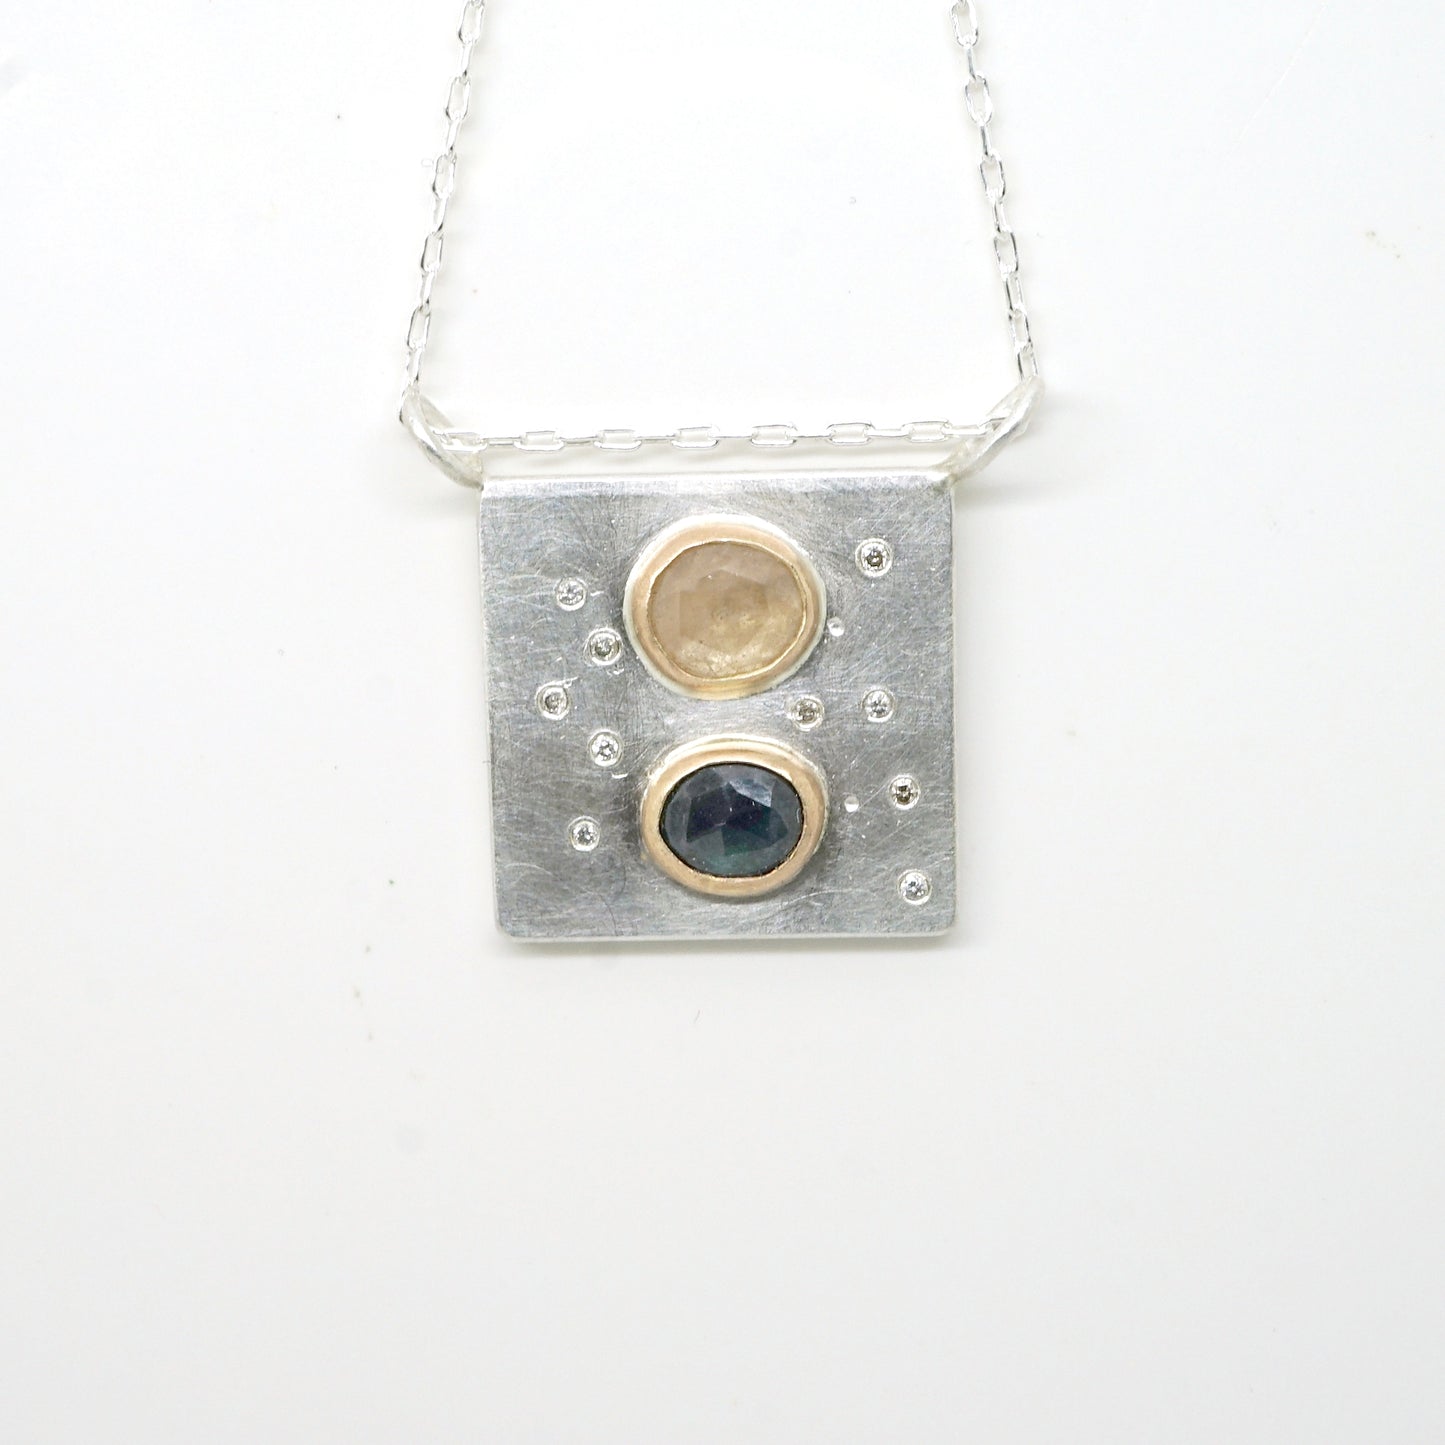 Art pendant necklace with sapphire and diamond